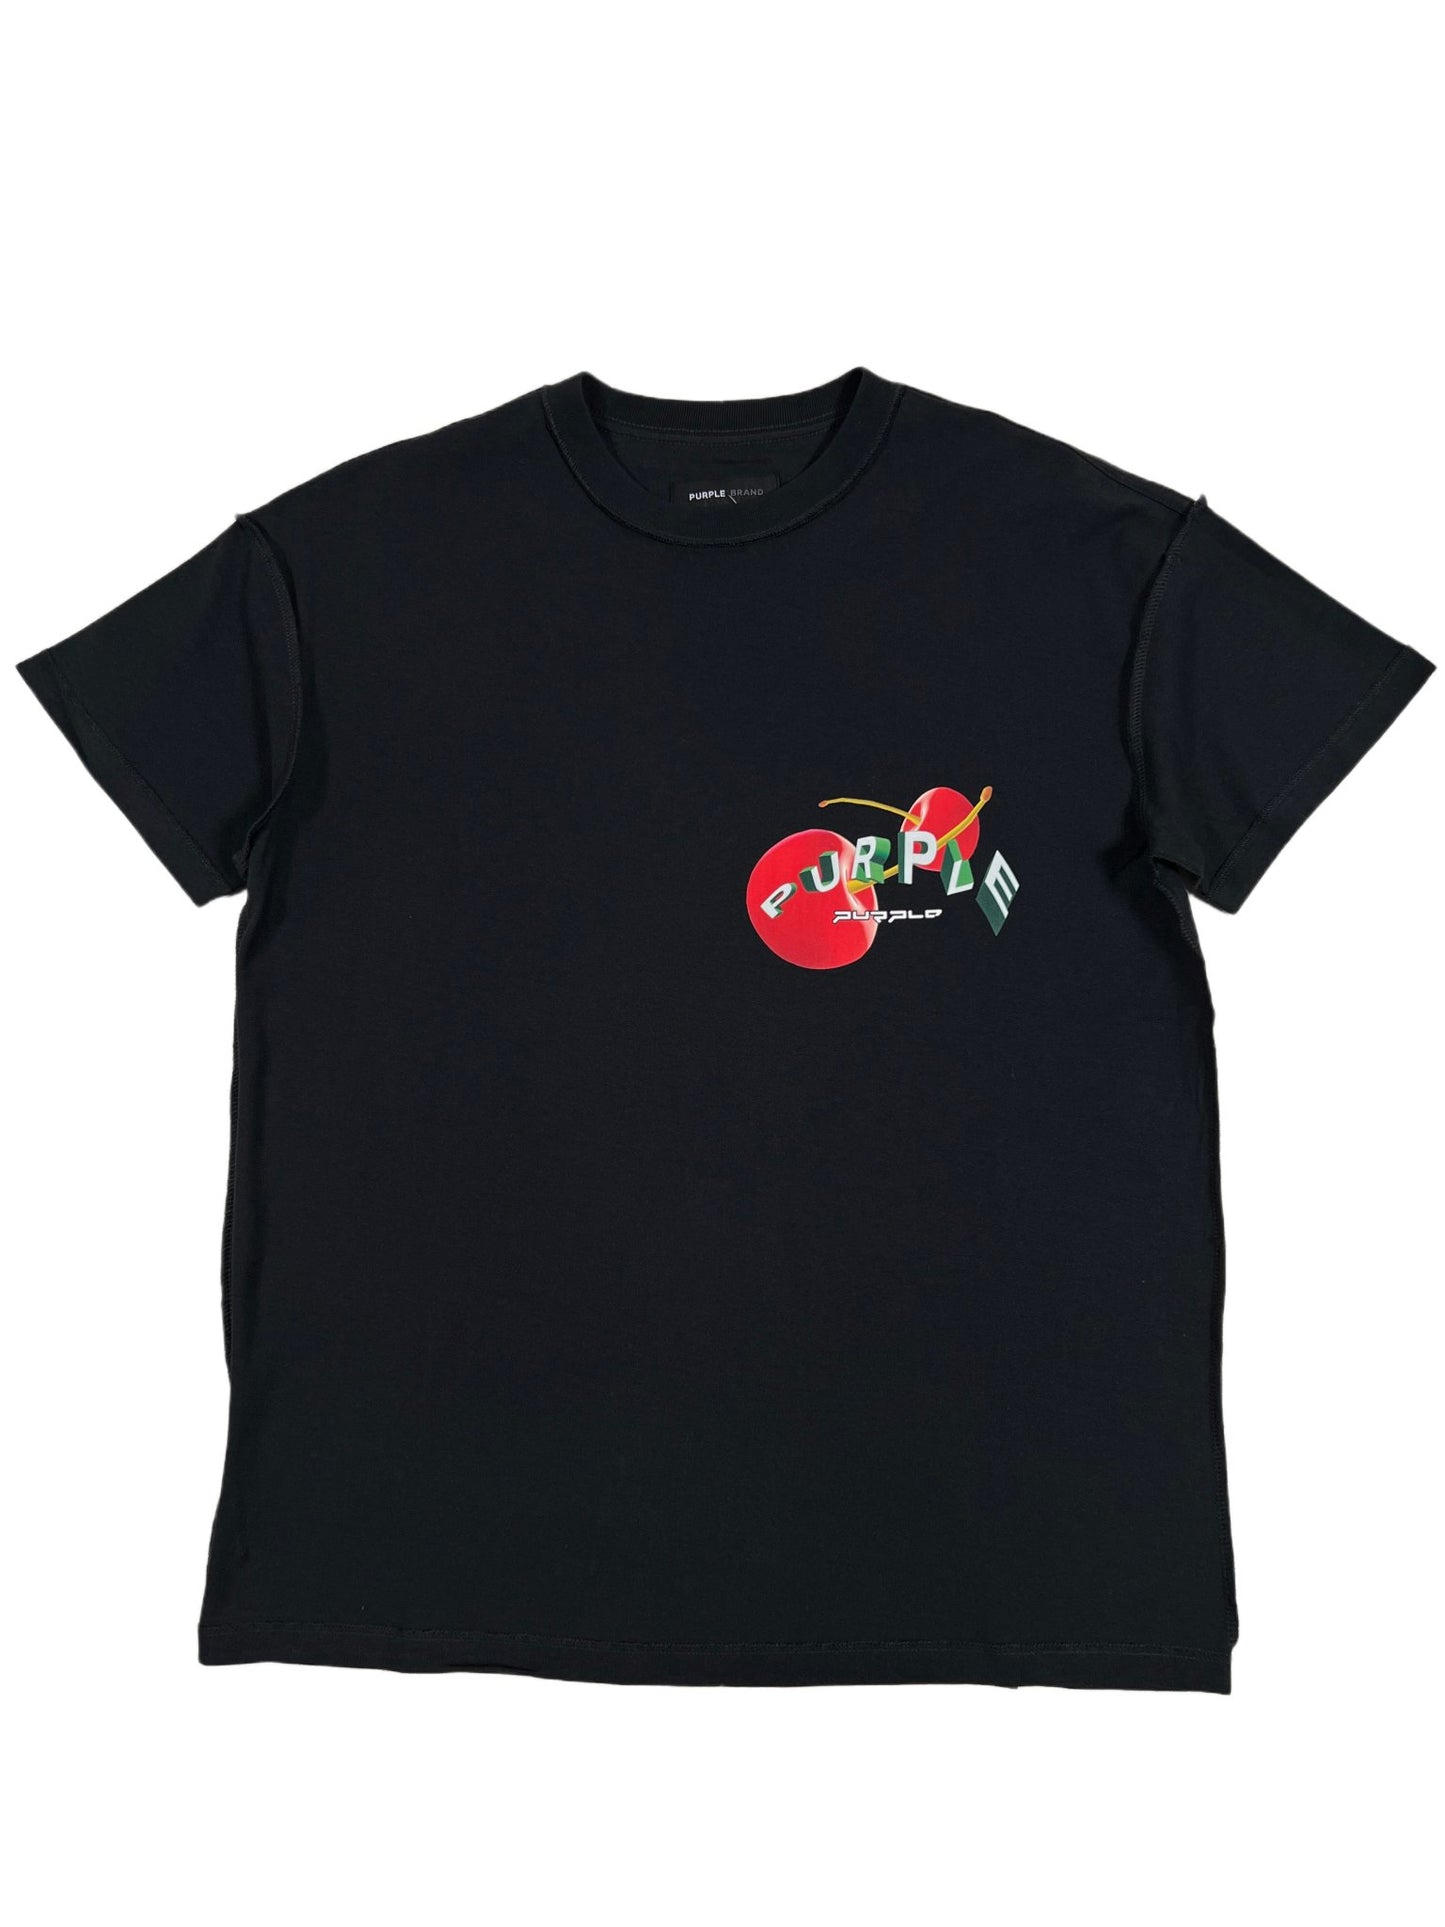 A PURPLE BRAND P101-JSTB TEXTURED INSIDE OUT TEE BLK with a red flower on it.